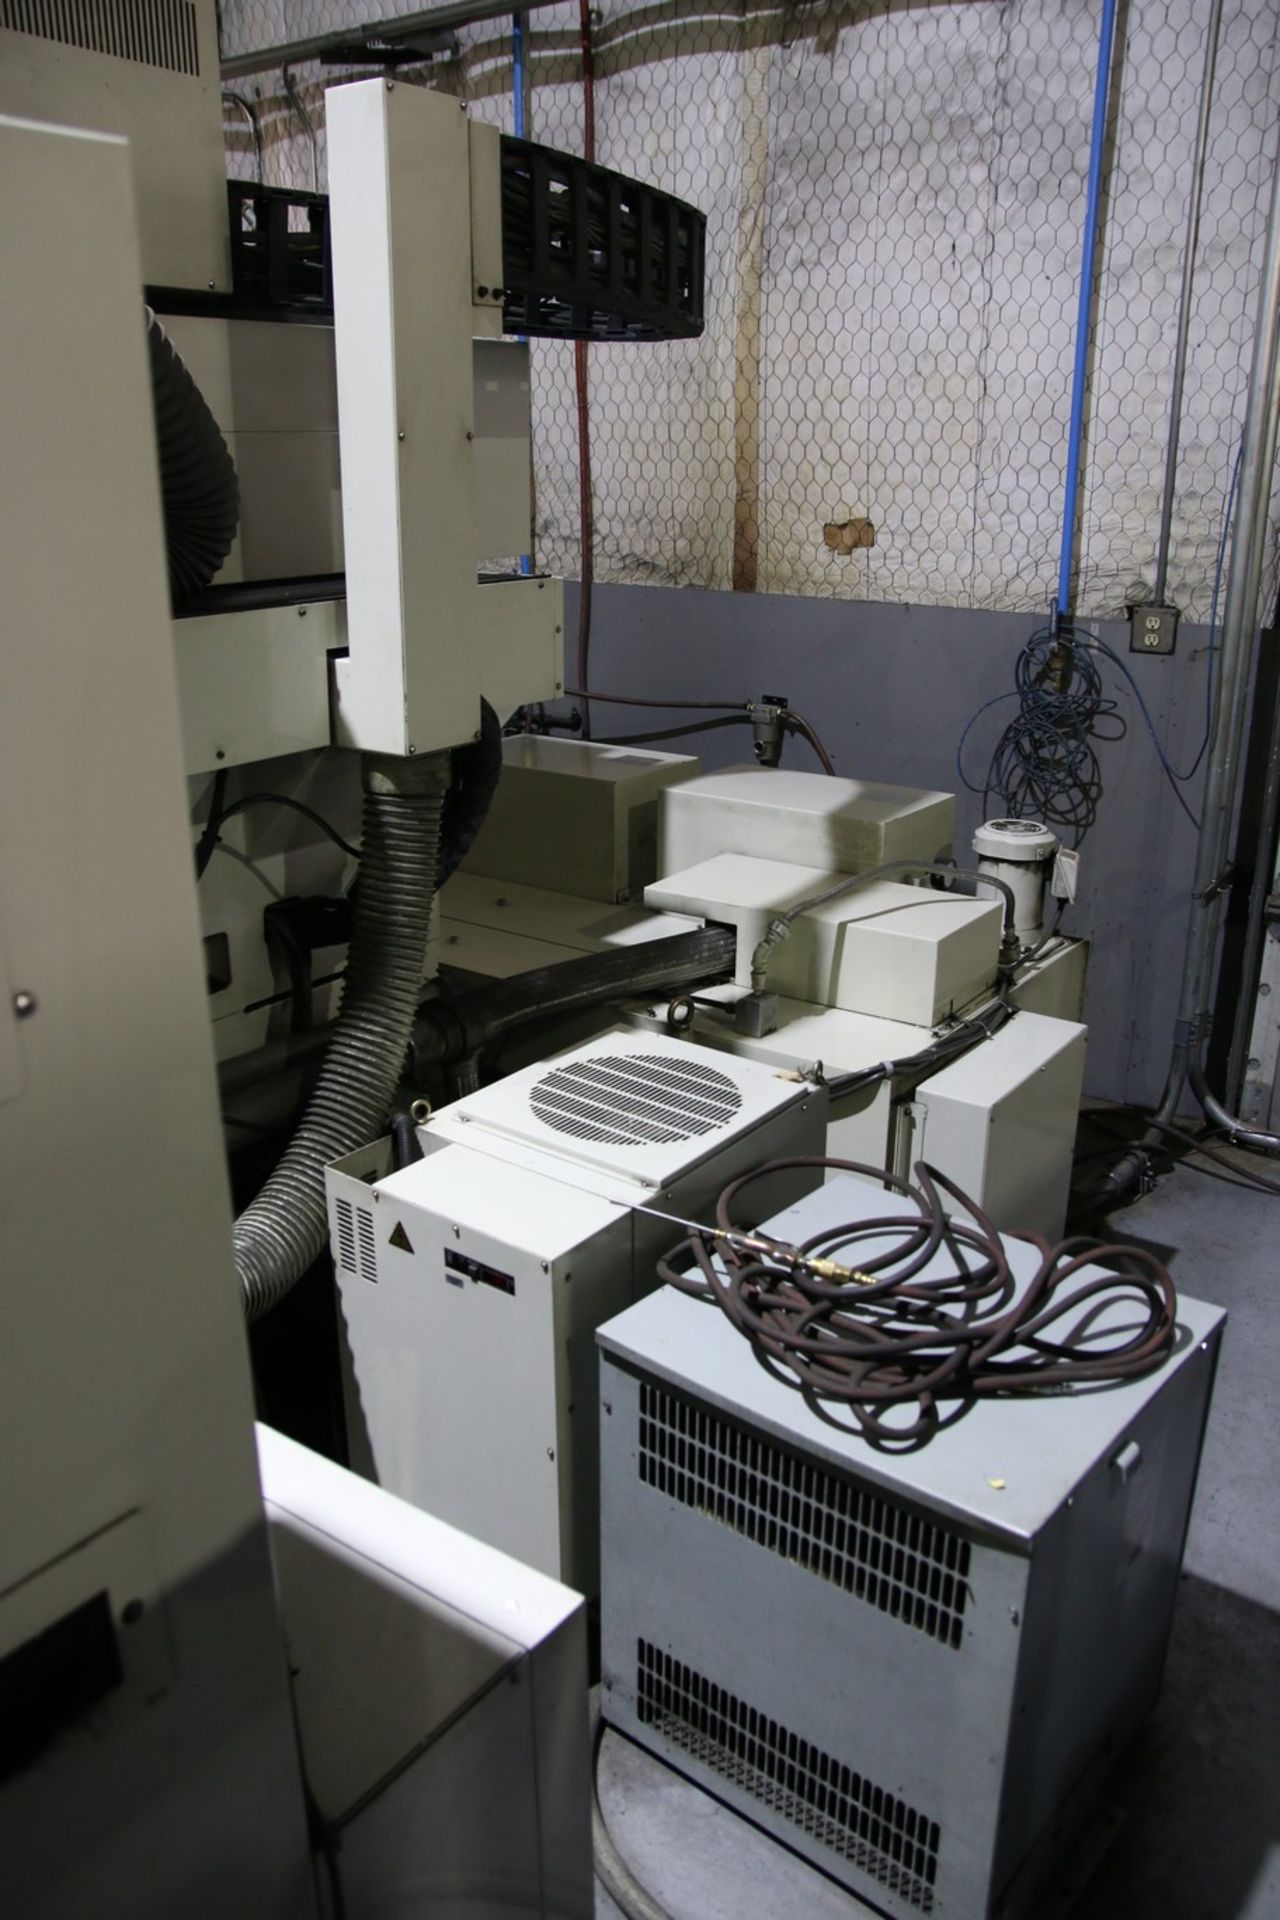 1999 Mitsubishi EX30 Mitsubishi EX30 EDM Machine with Robot 28" x 40" Table, with System 3R - Image 2 of 16